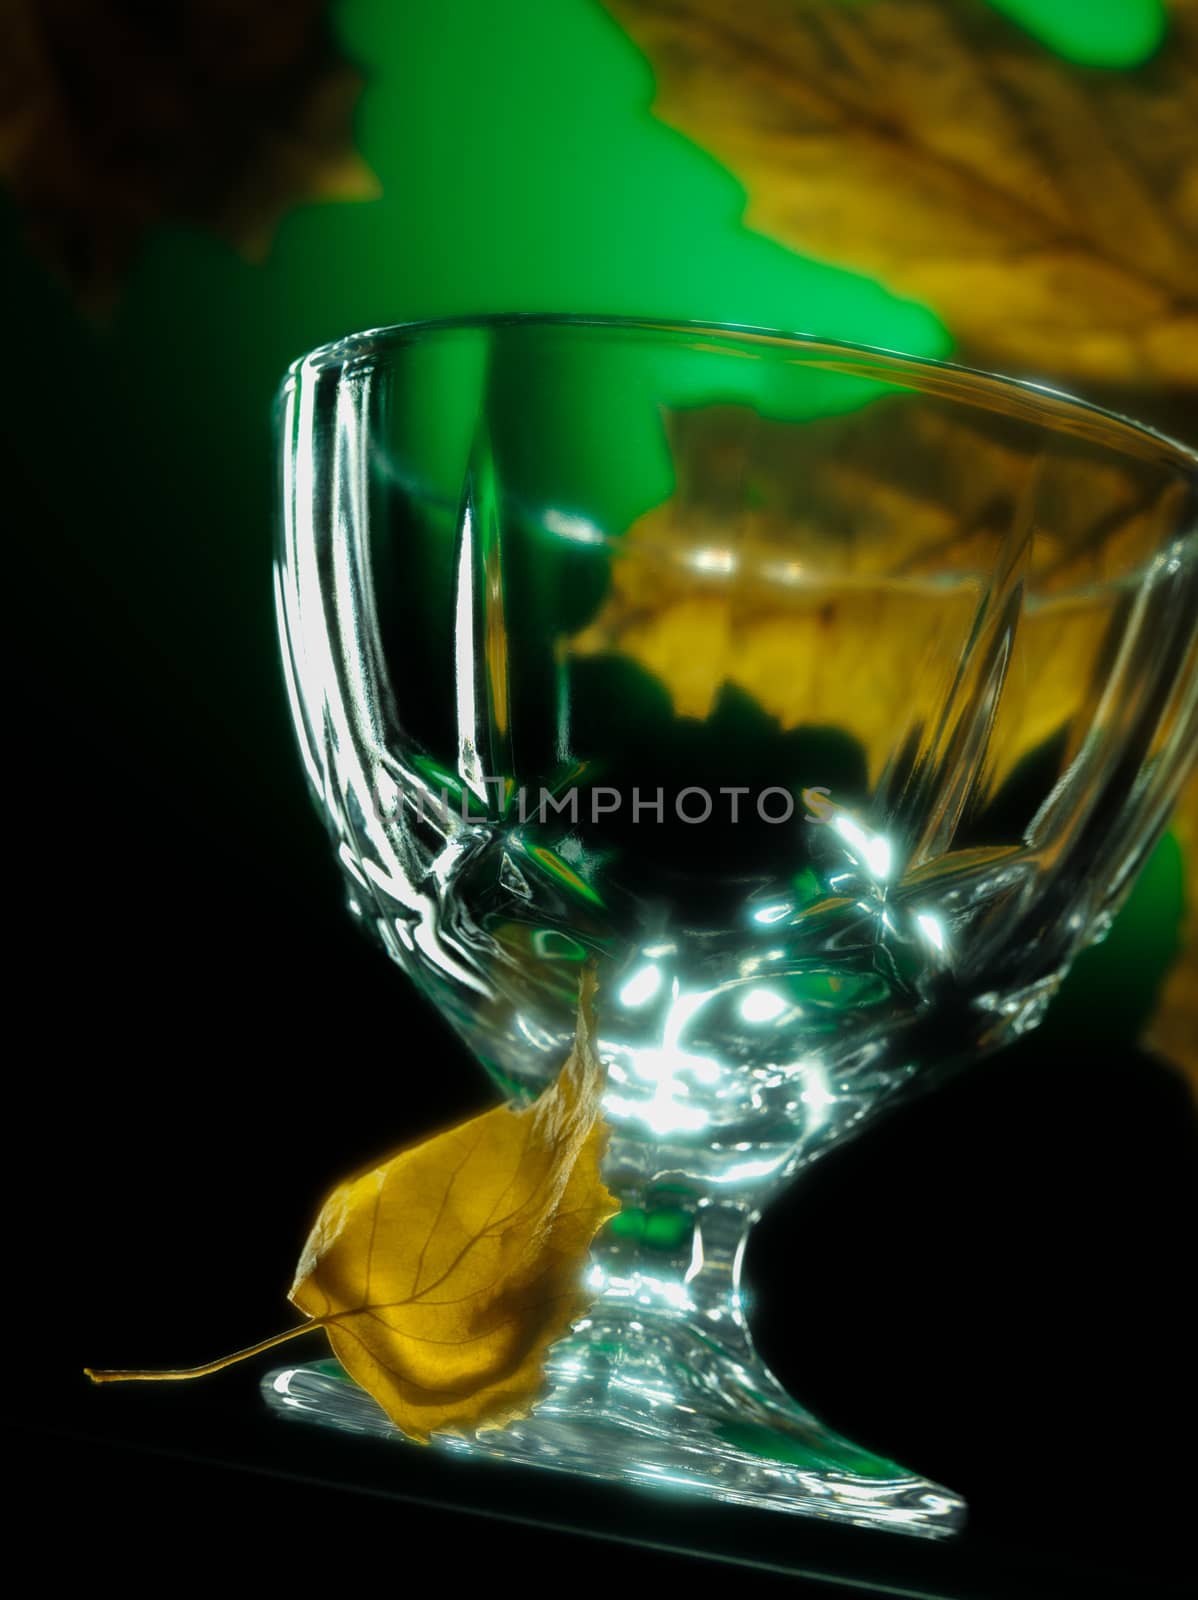 A transparent crystal glass on a dark green background with yellow autumn leaves